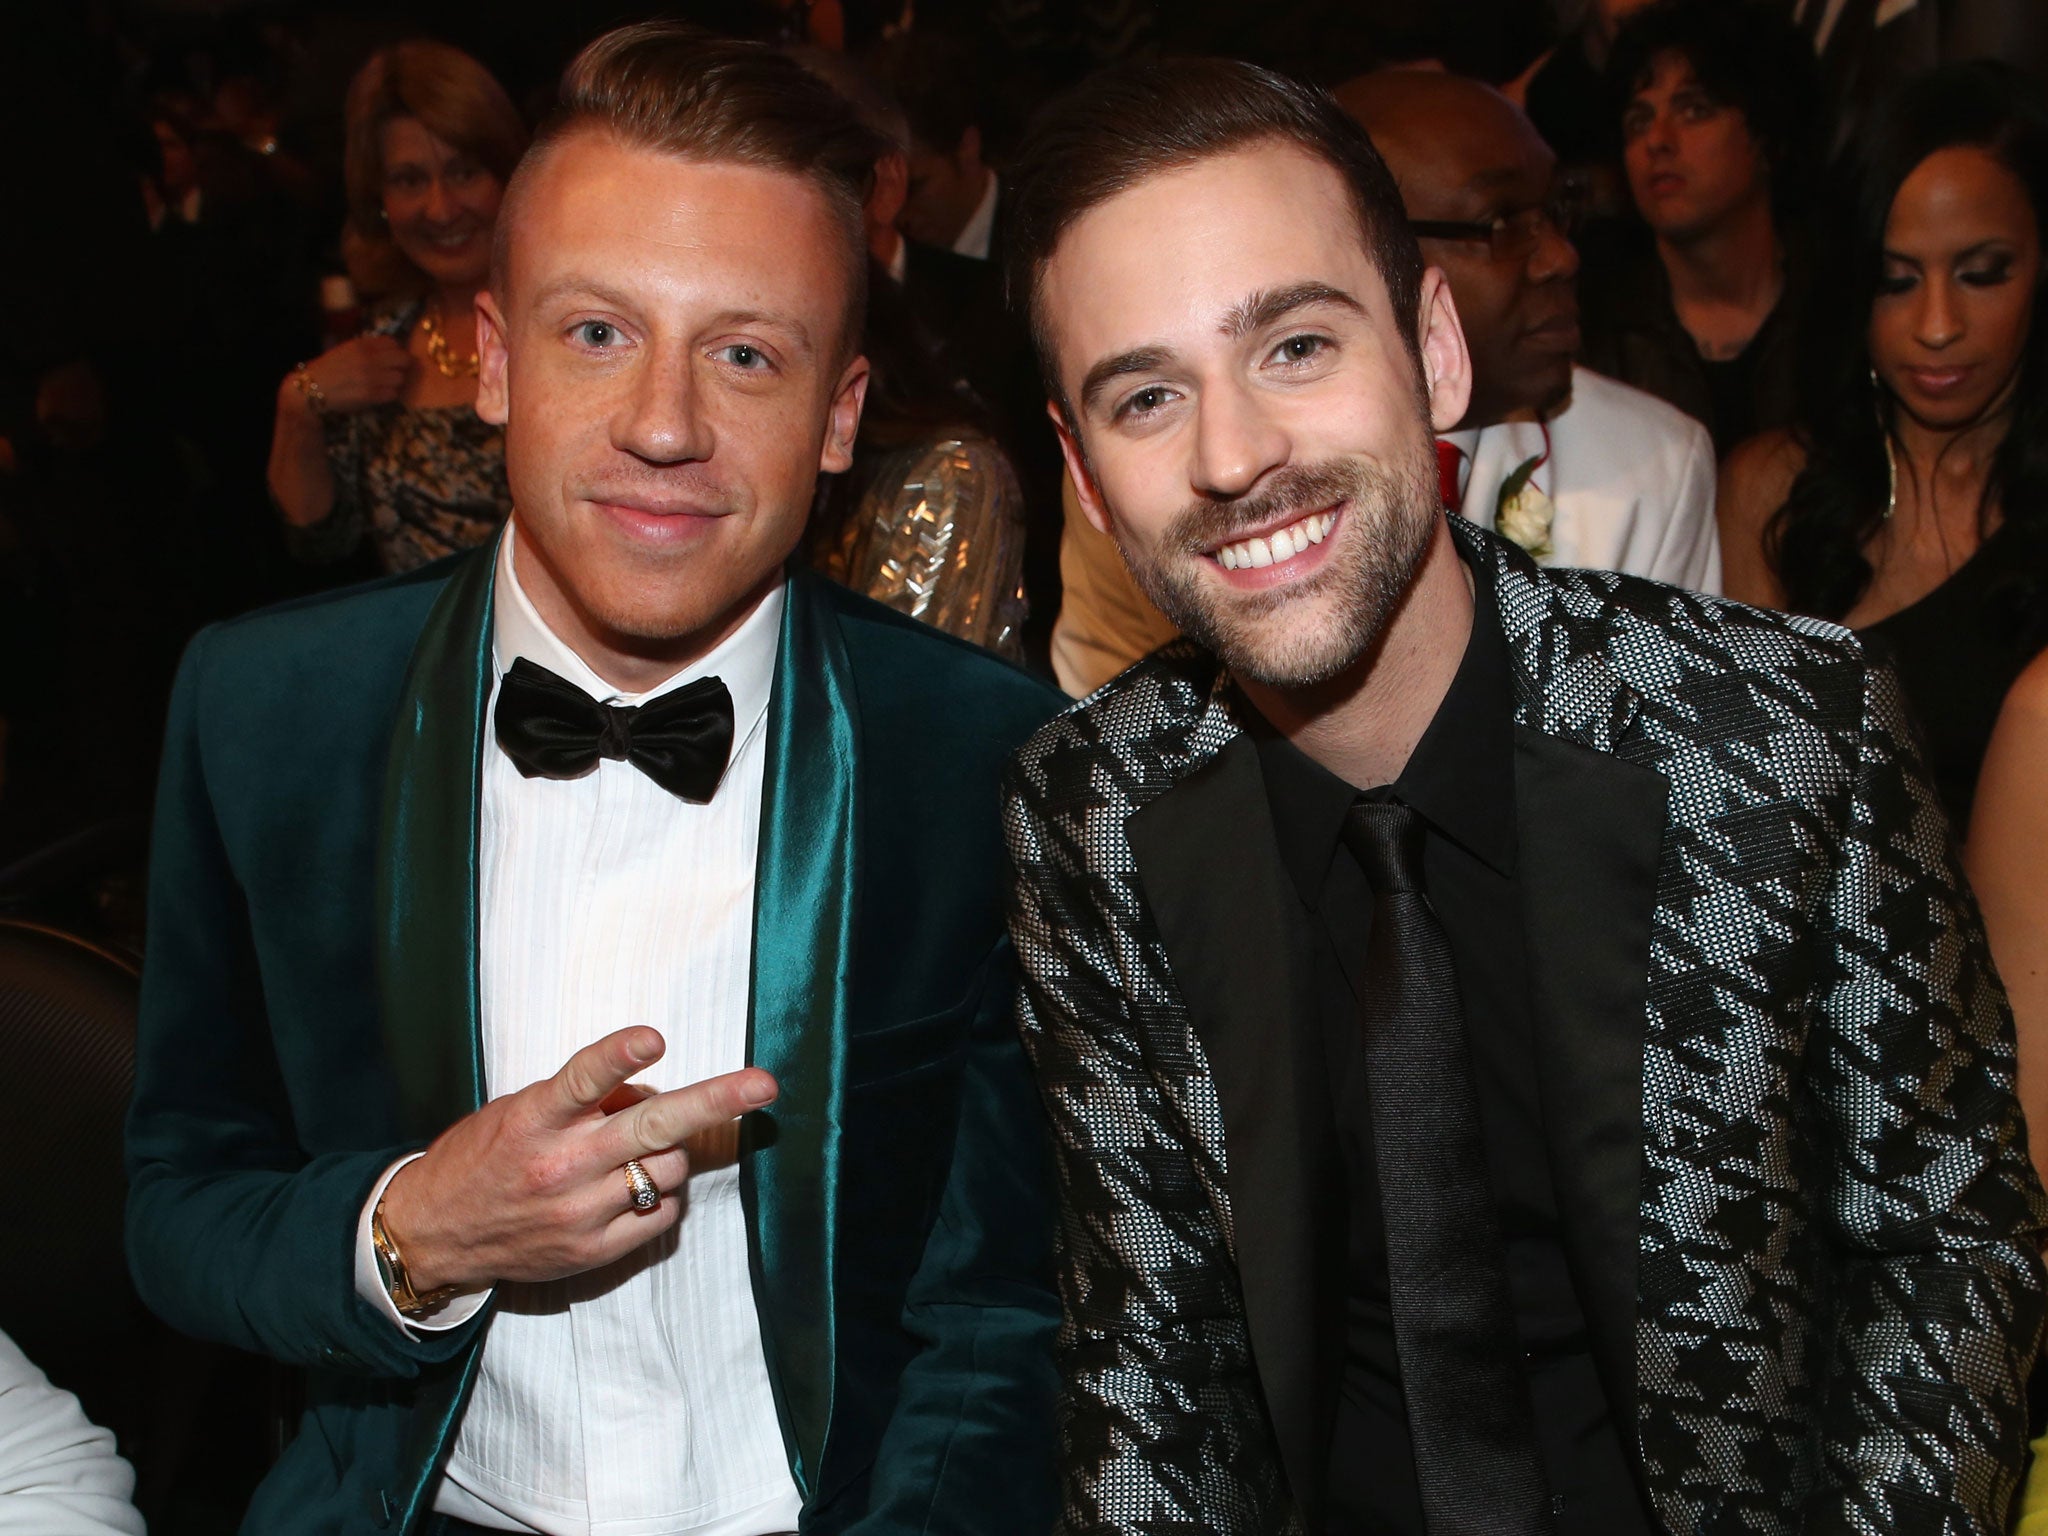 Who's that bloke next to Macklemore on the right? Ryan Lewis who?